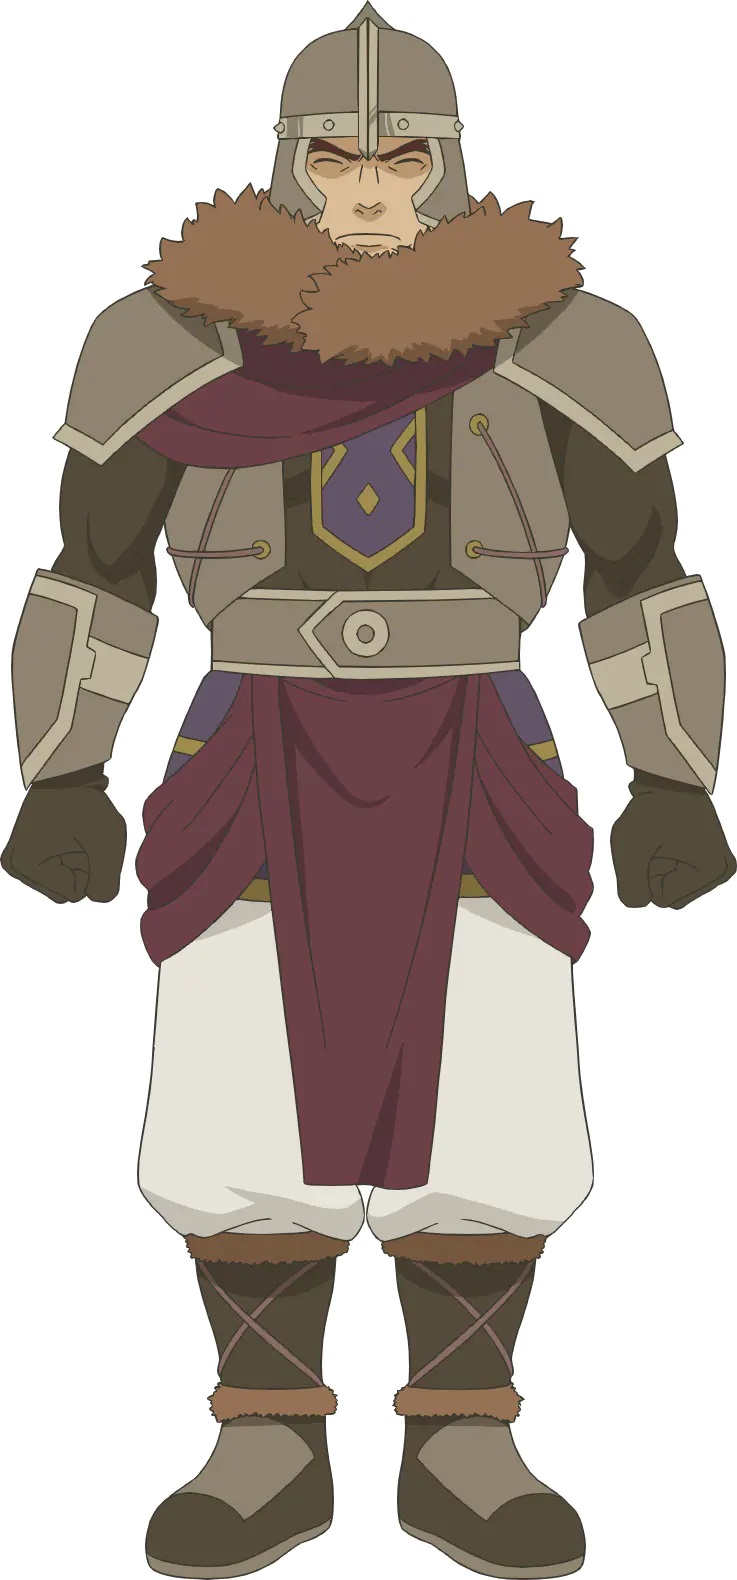 A character setting of Dormul Bolster from the upcoming 4th season of the Is It Wrong to Try to Pick Up Girls in a Dungeon? TV anime. Dormul is a dwarf warrior in half plate armor with a fur collar and a pot helmet.